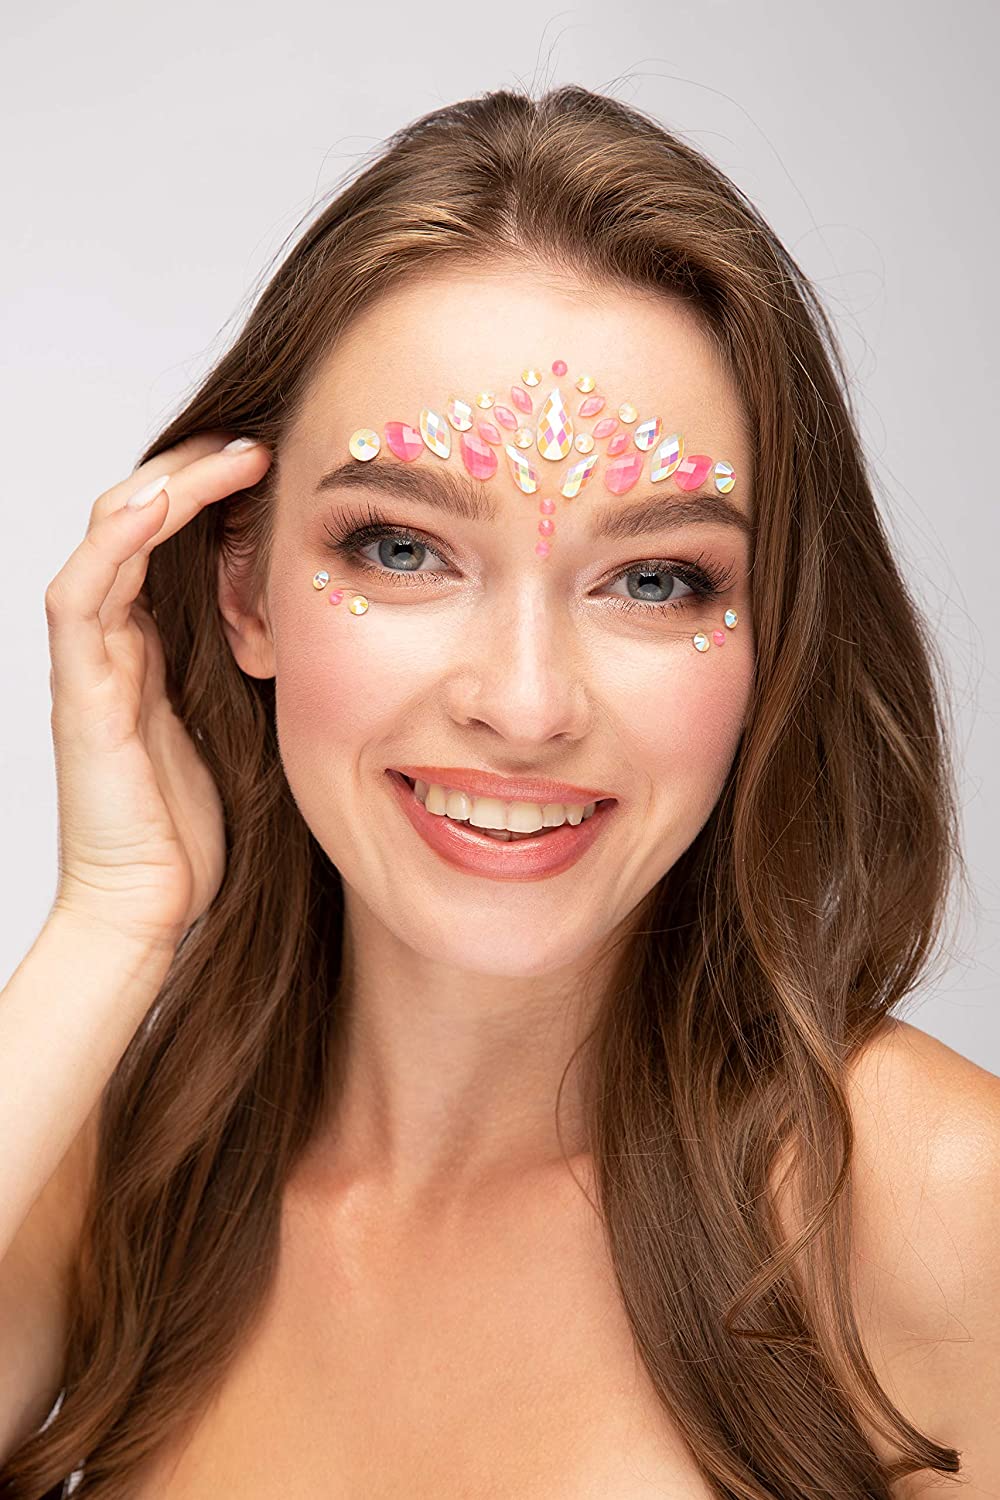 Glow in the Dark Face Jewels by Moon Glow - Festival Face Body Gems, Crystal Make up Eye Glitter Stickers, Temporary Tattoo Jewels (Pink Flamingo)